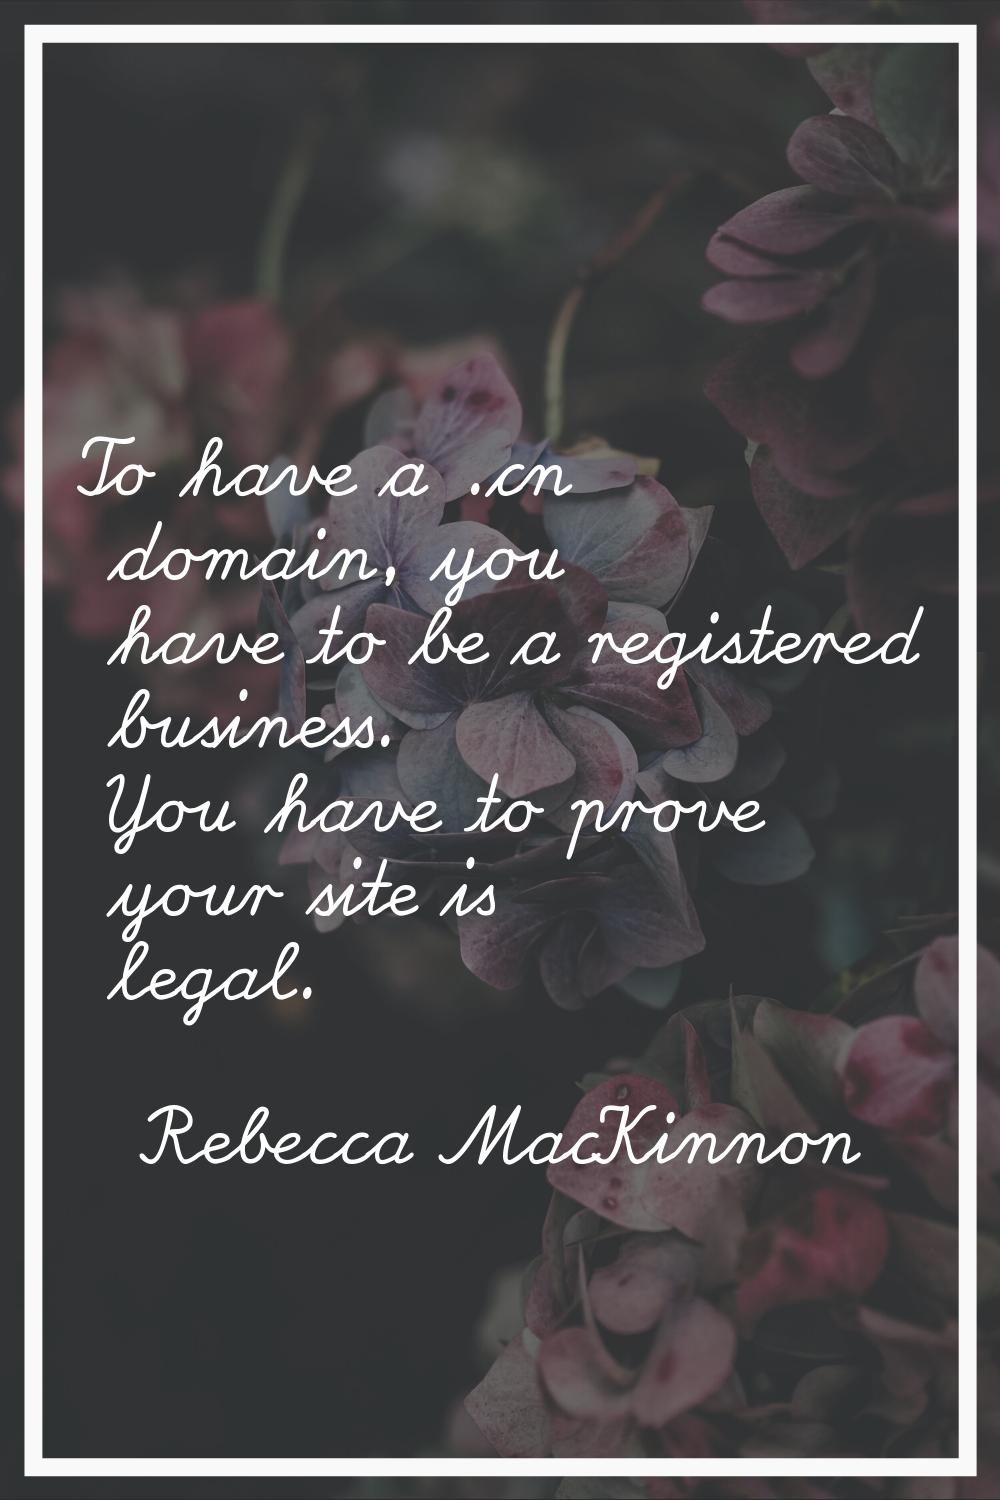 To have a .cn domain, you have to be a registered business. You have to prove your site is legal.